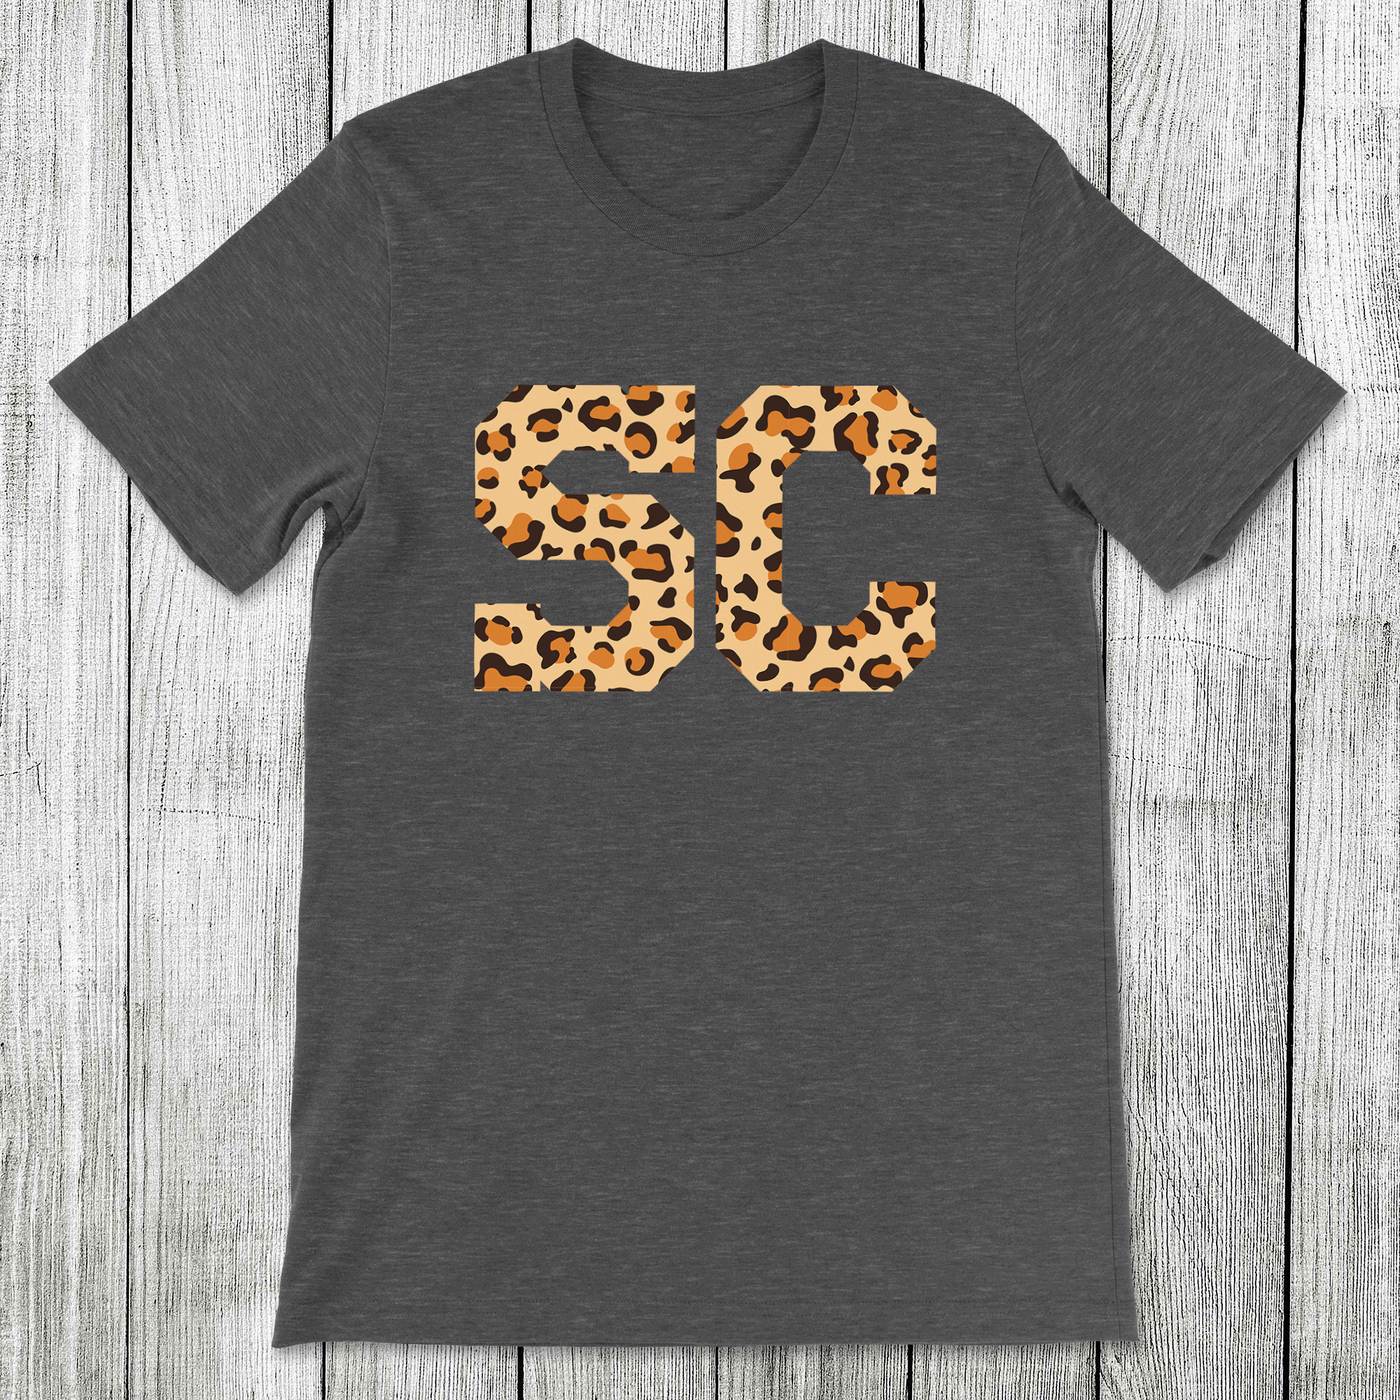 Daydream Tees State Leopard SC